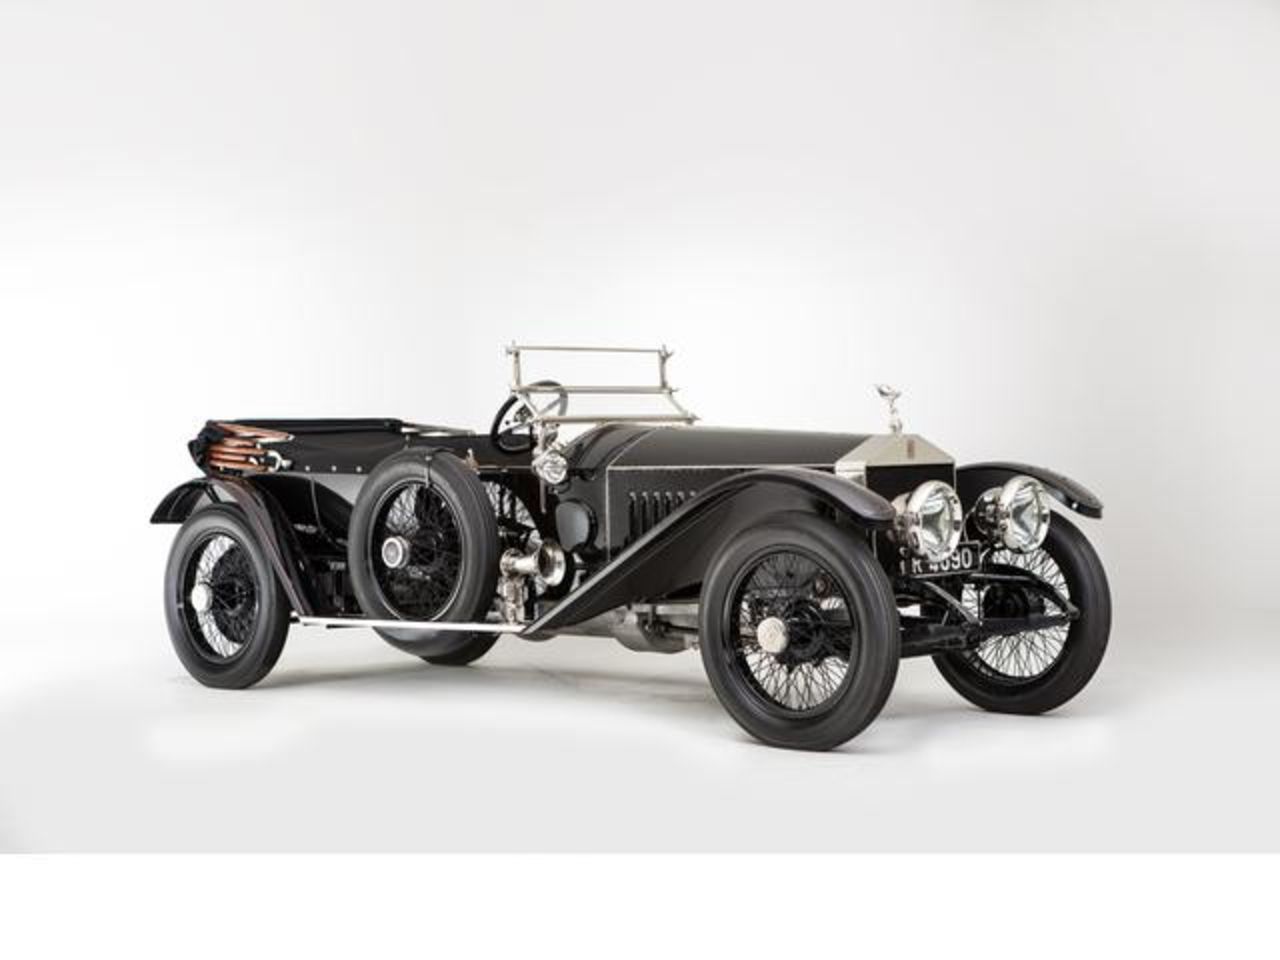 The 101 year-old Rolls Royce Silver Ghost sold on Sunday for $1.36 million. When the car was first built in 1912, the company publicized its ability to travel the 800 mile round journey from London to Edinburgh and back.